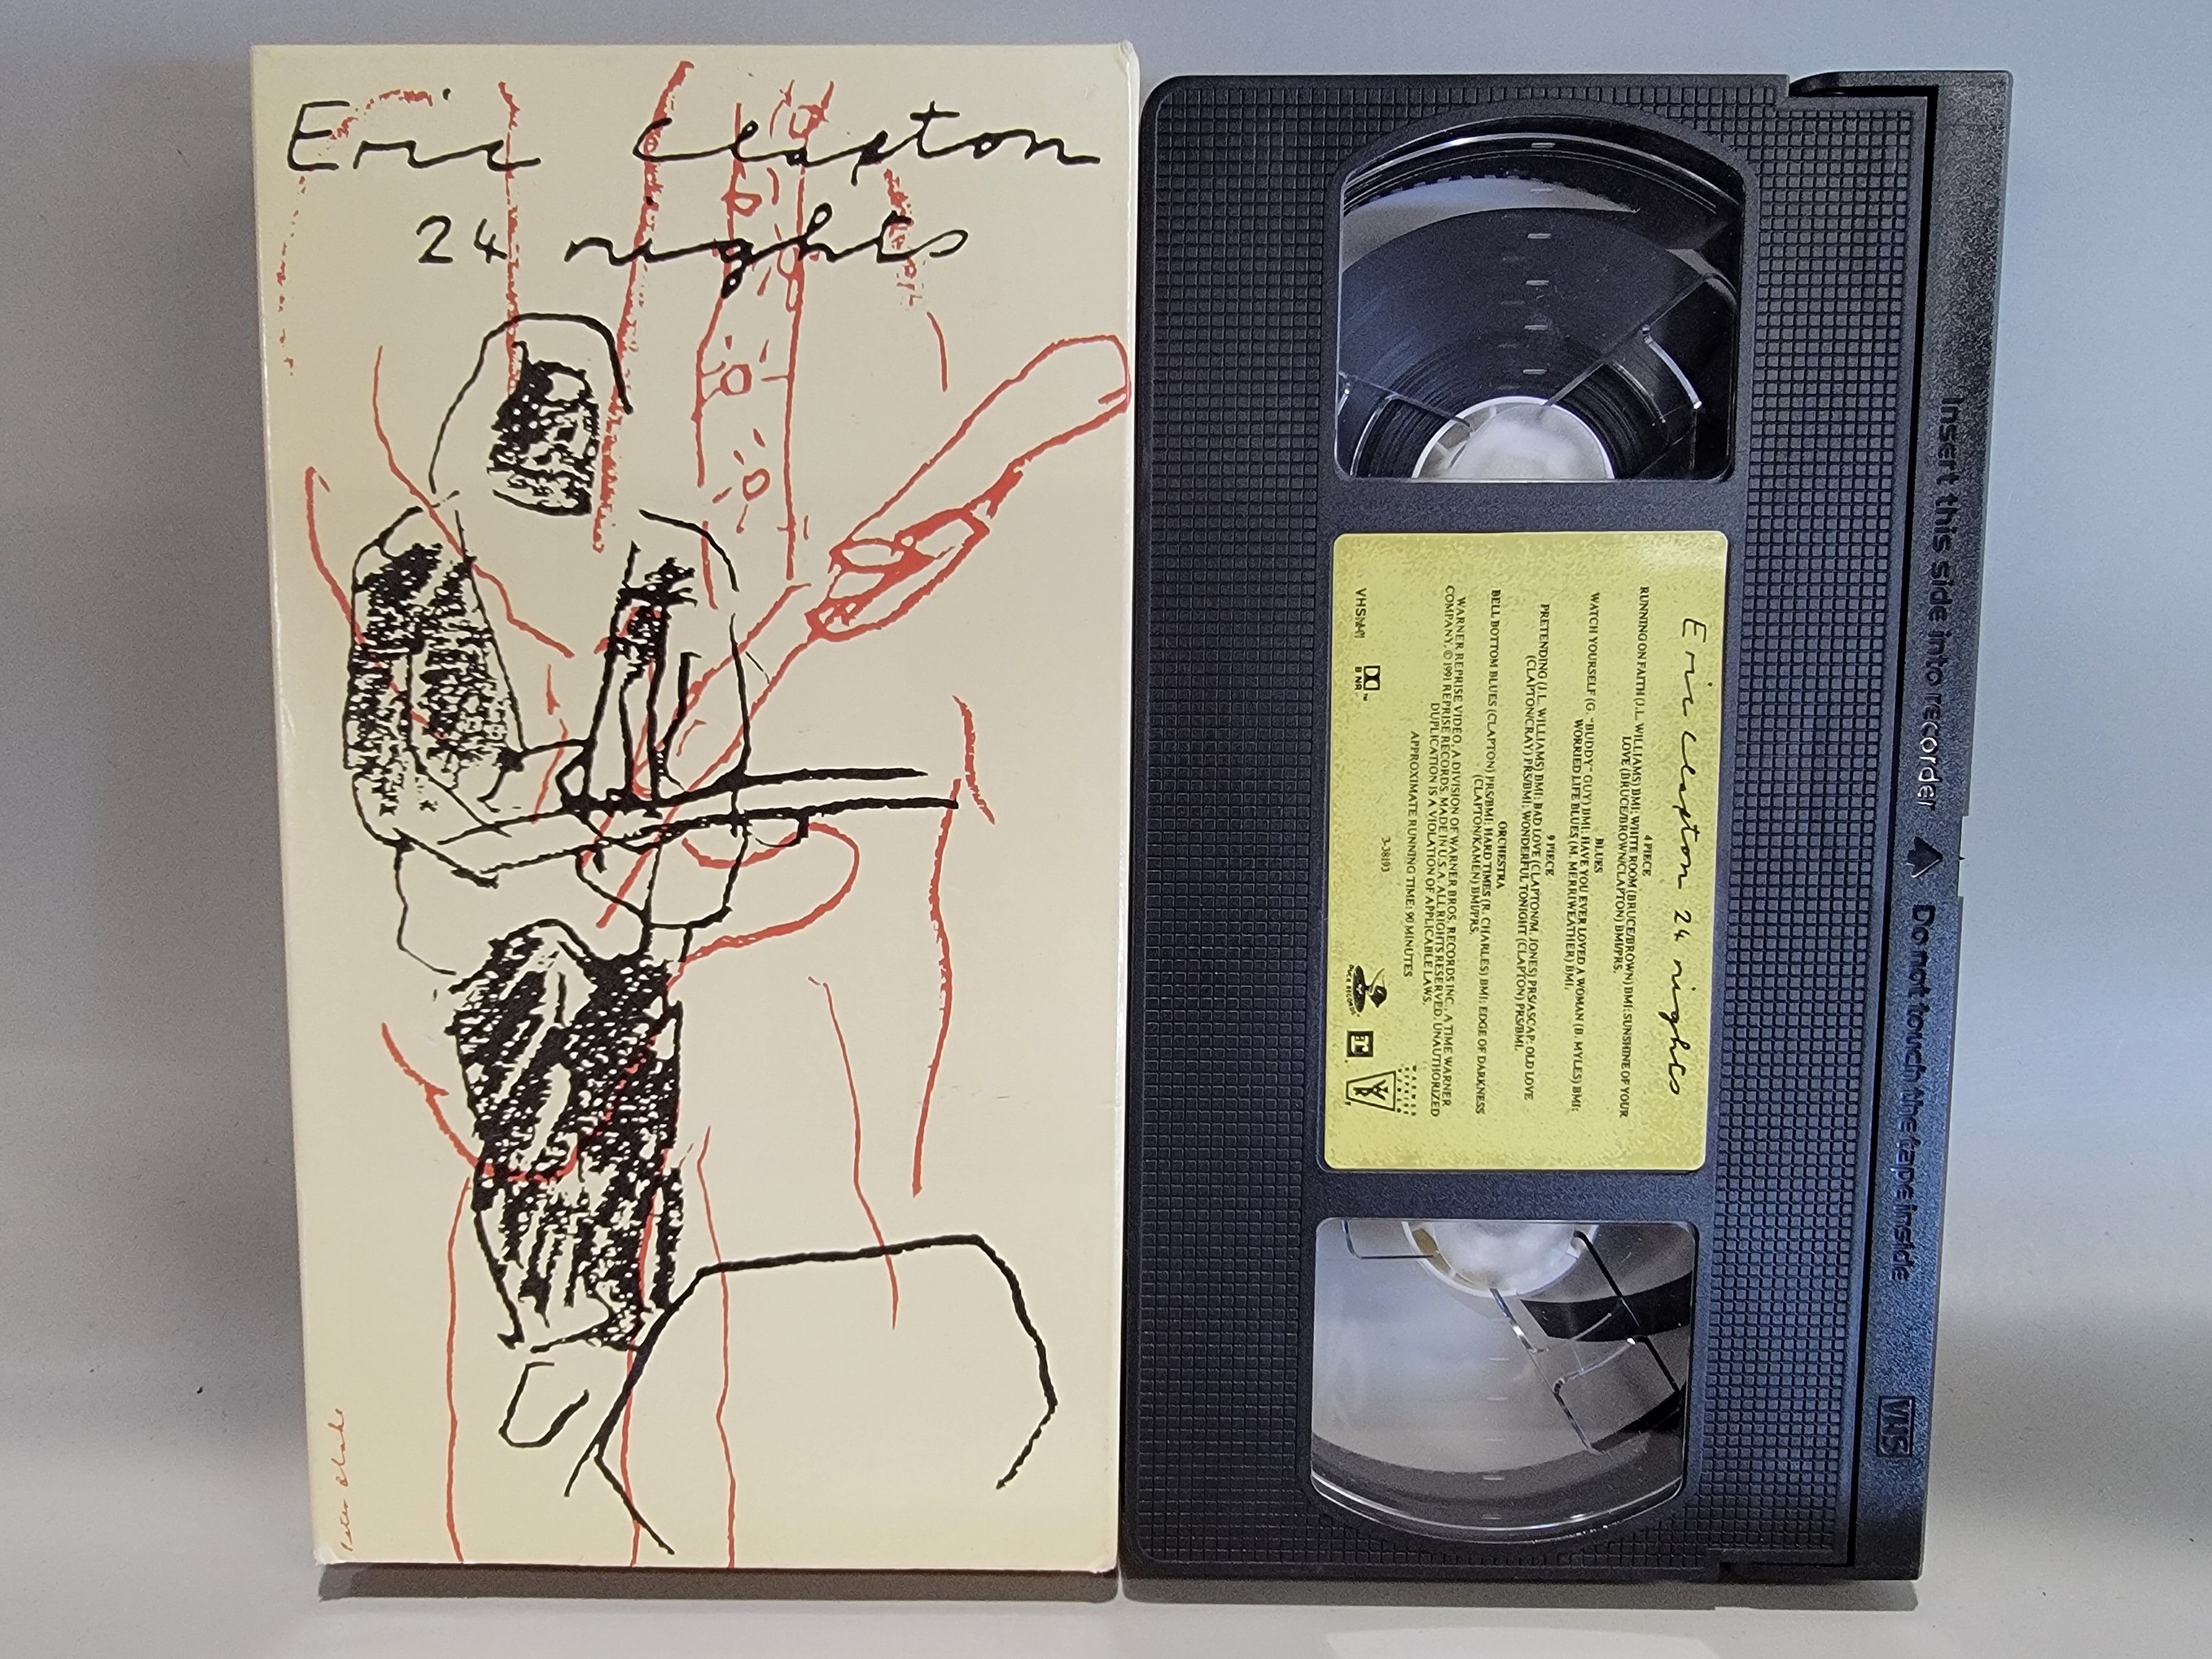 ERIC CLAPTON: 24 NIGHTS VHS [USED]